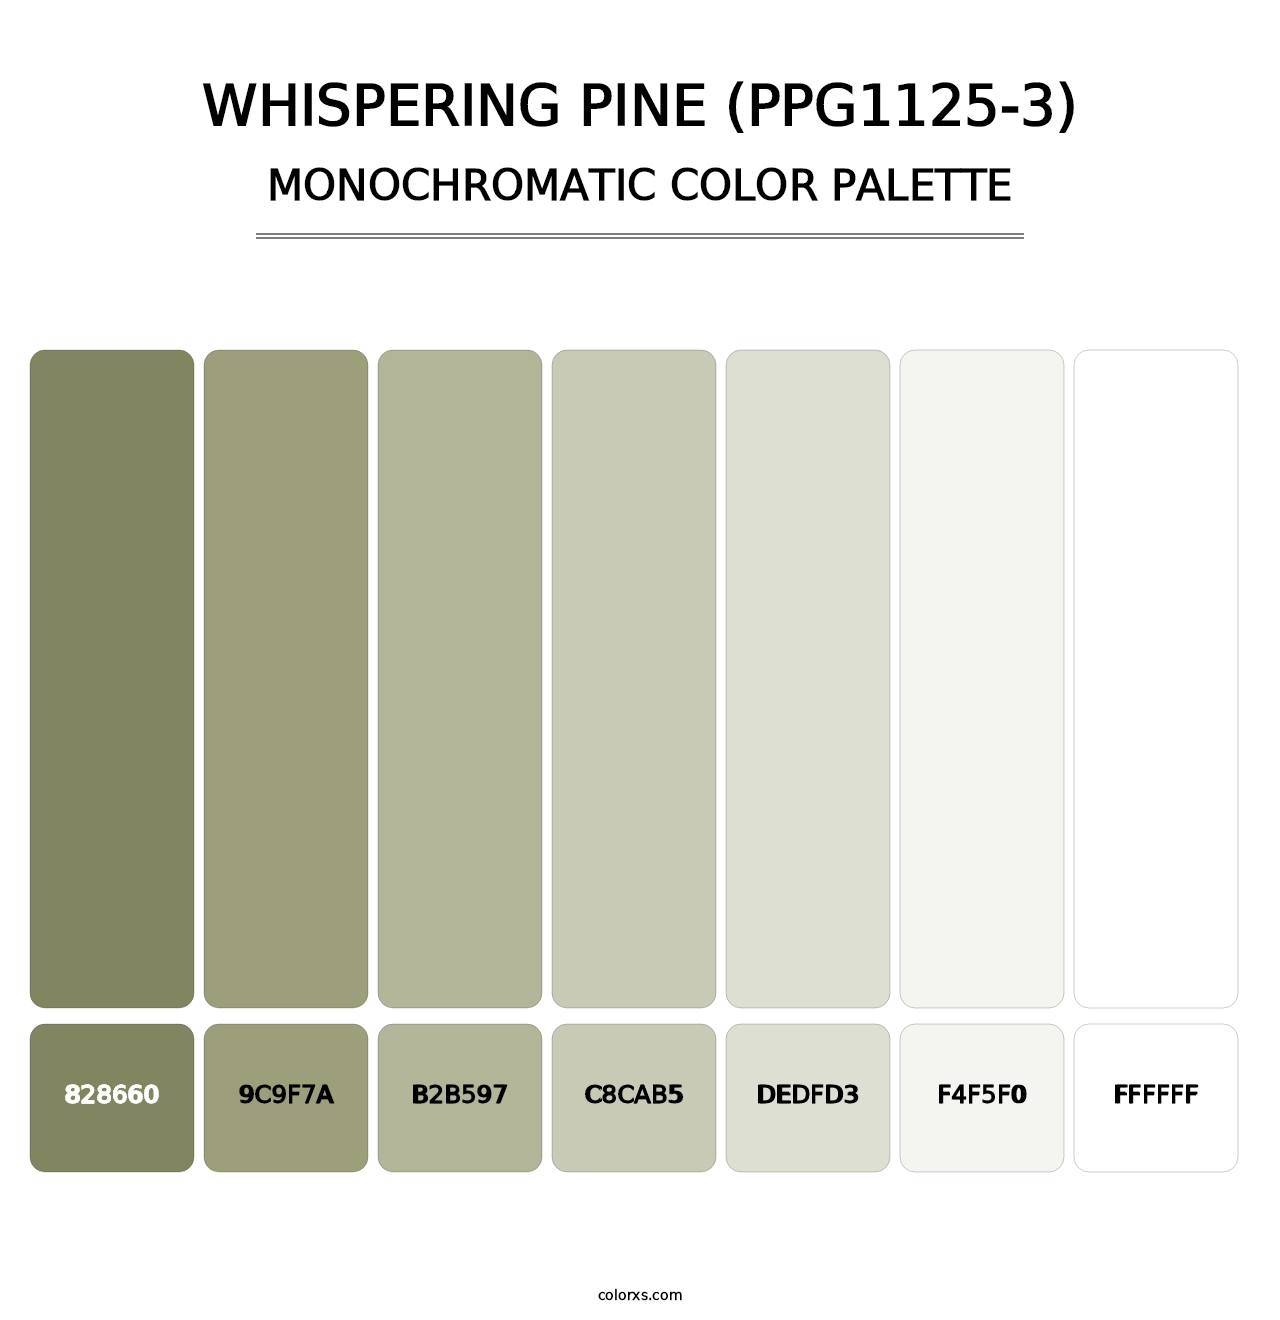 Whispering Pine (PPG1125-3) - Monochromatic Color Palette